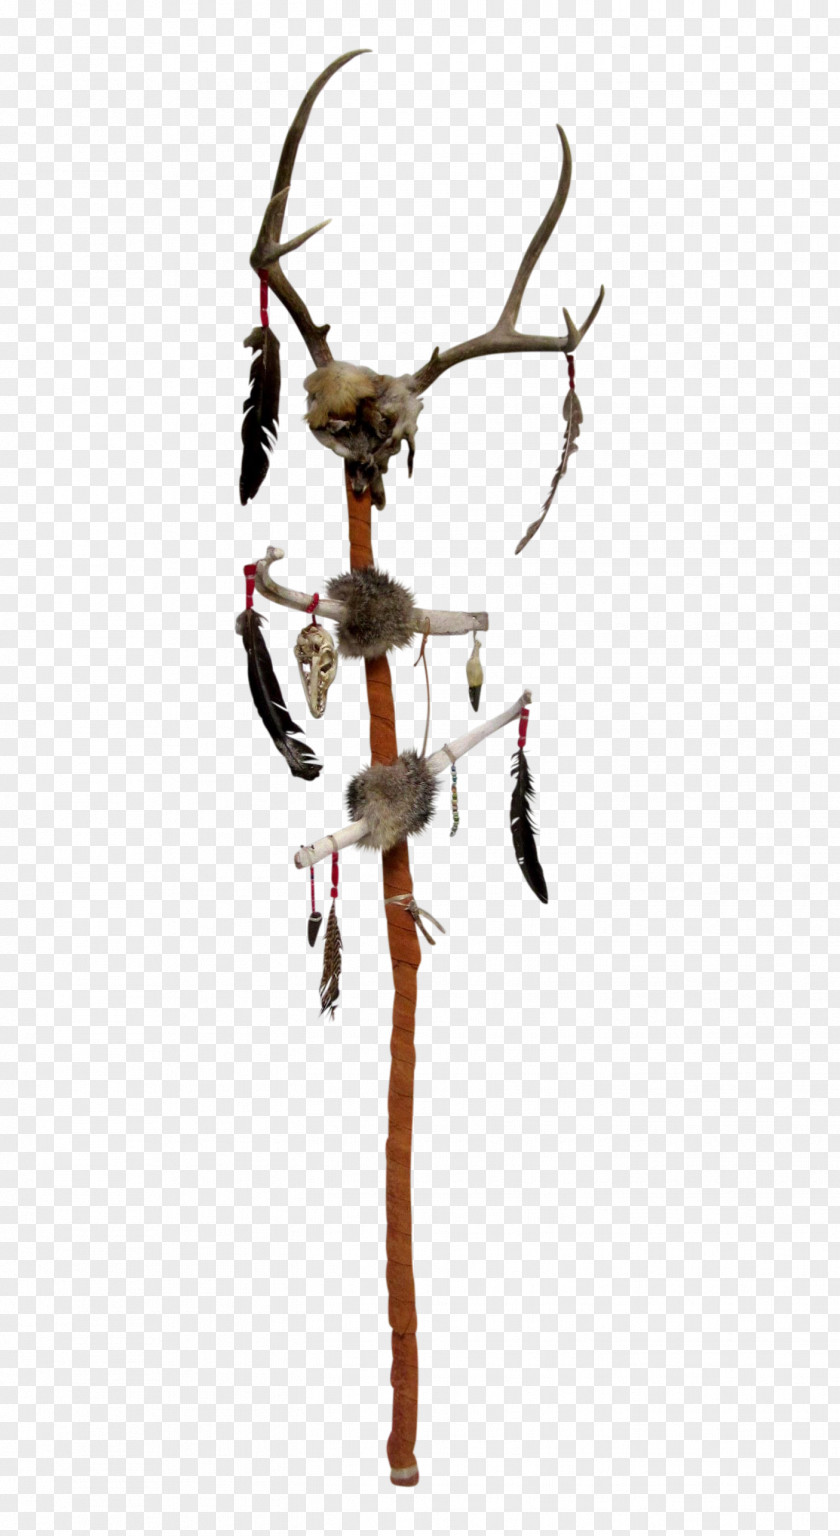 Walking Stick Native Americans In The United States Bastone PNG